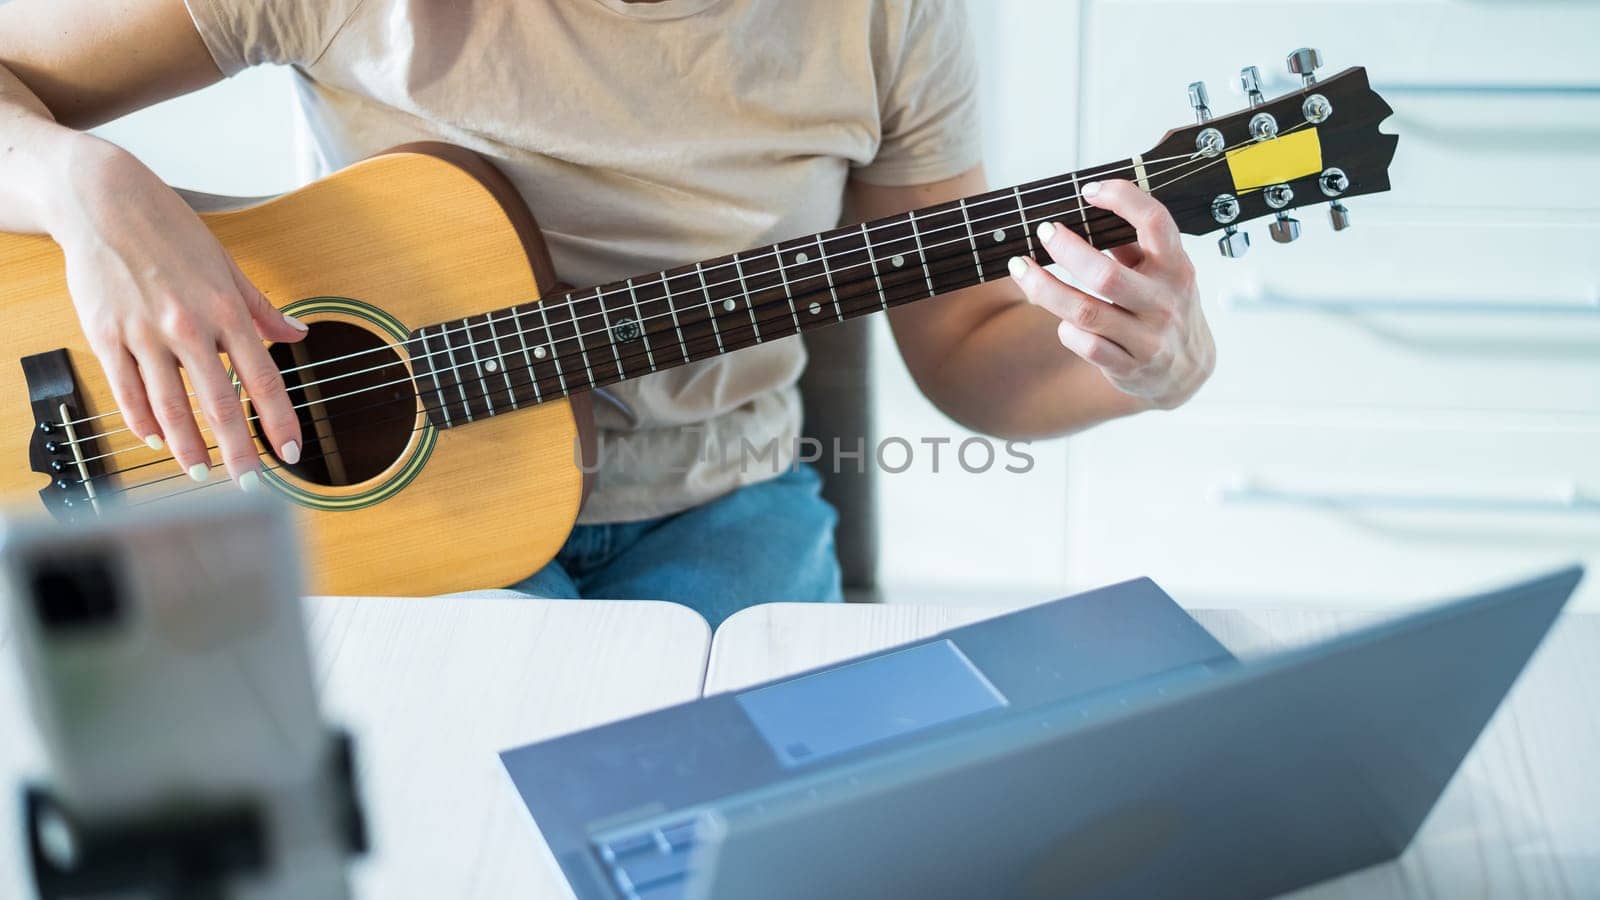 A woman sits in the kitchen during a remote acoustic guitar lesson. A girl learns to play the guitar and watches educational videos on a laptop.